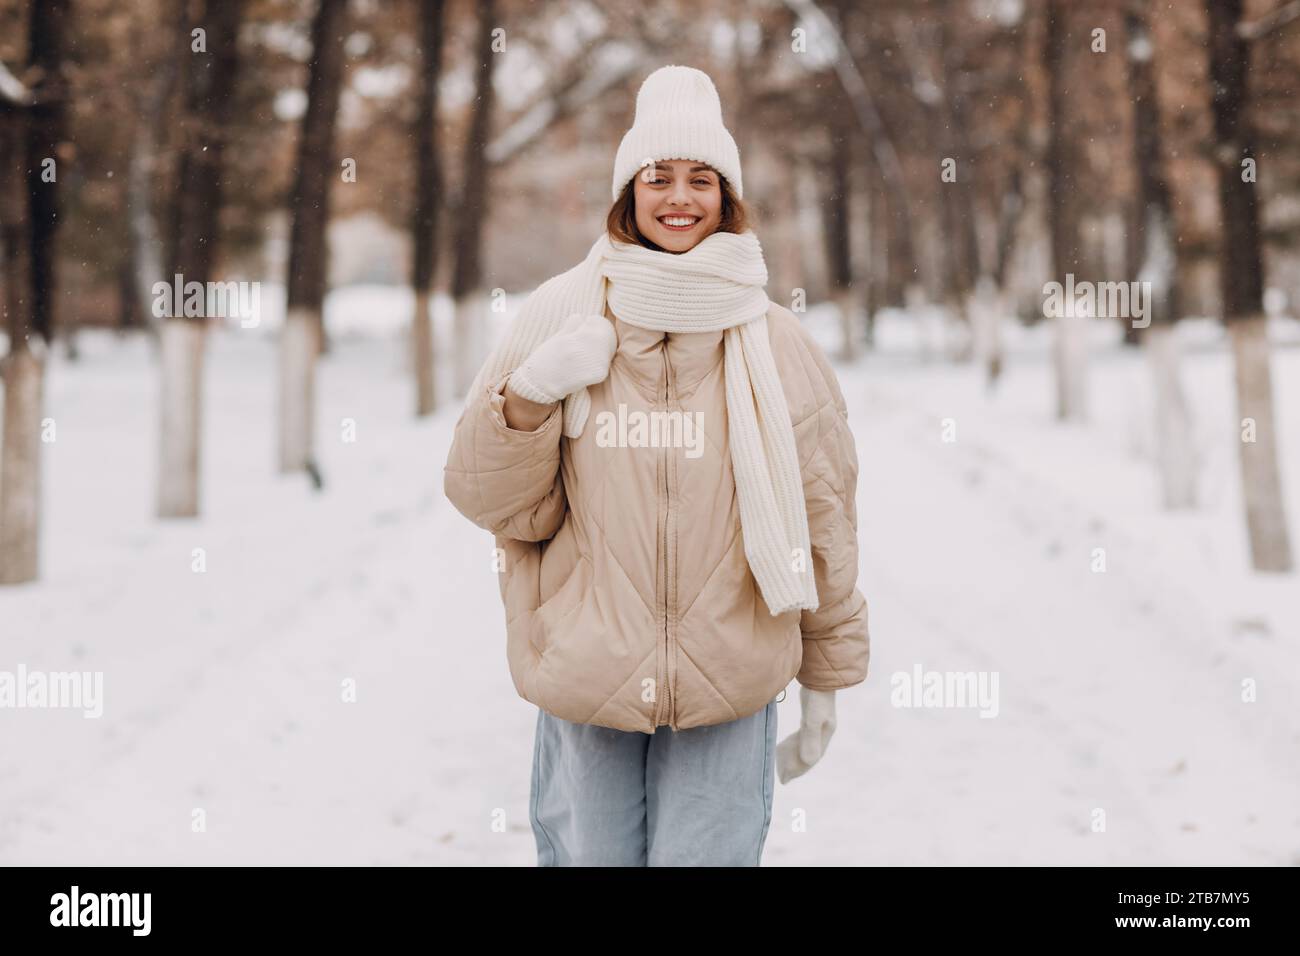 Happy smiling young woman dressed down jacket scarf hat and mittens enjoys winter weather and walking through the snowy winter park Stock Photo